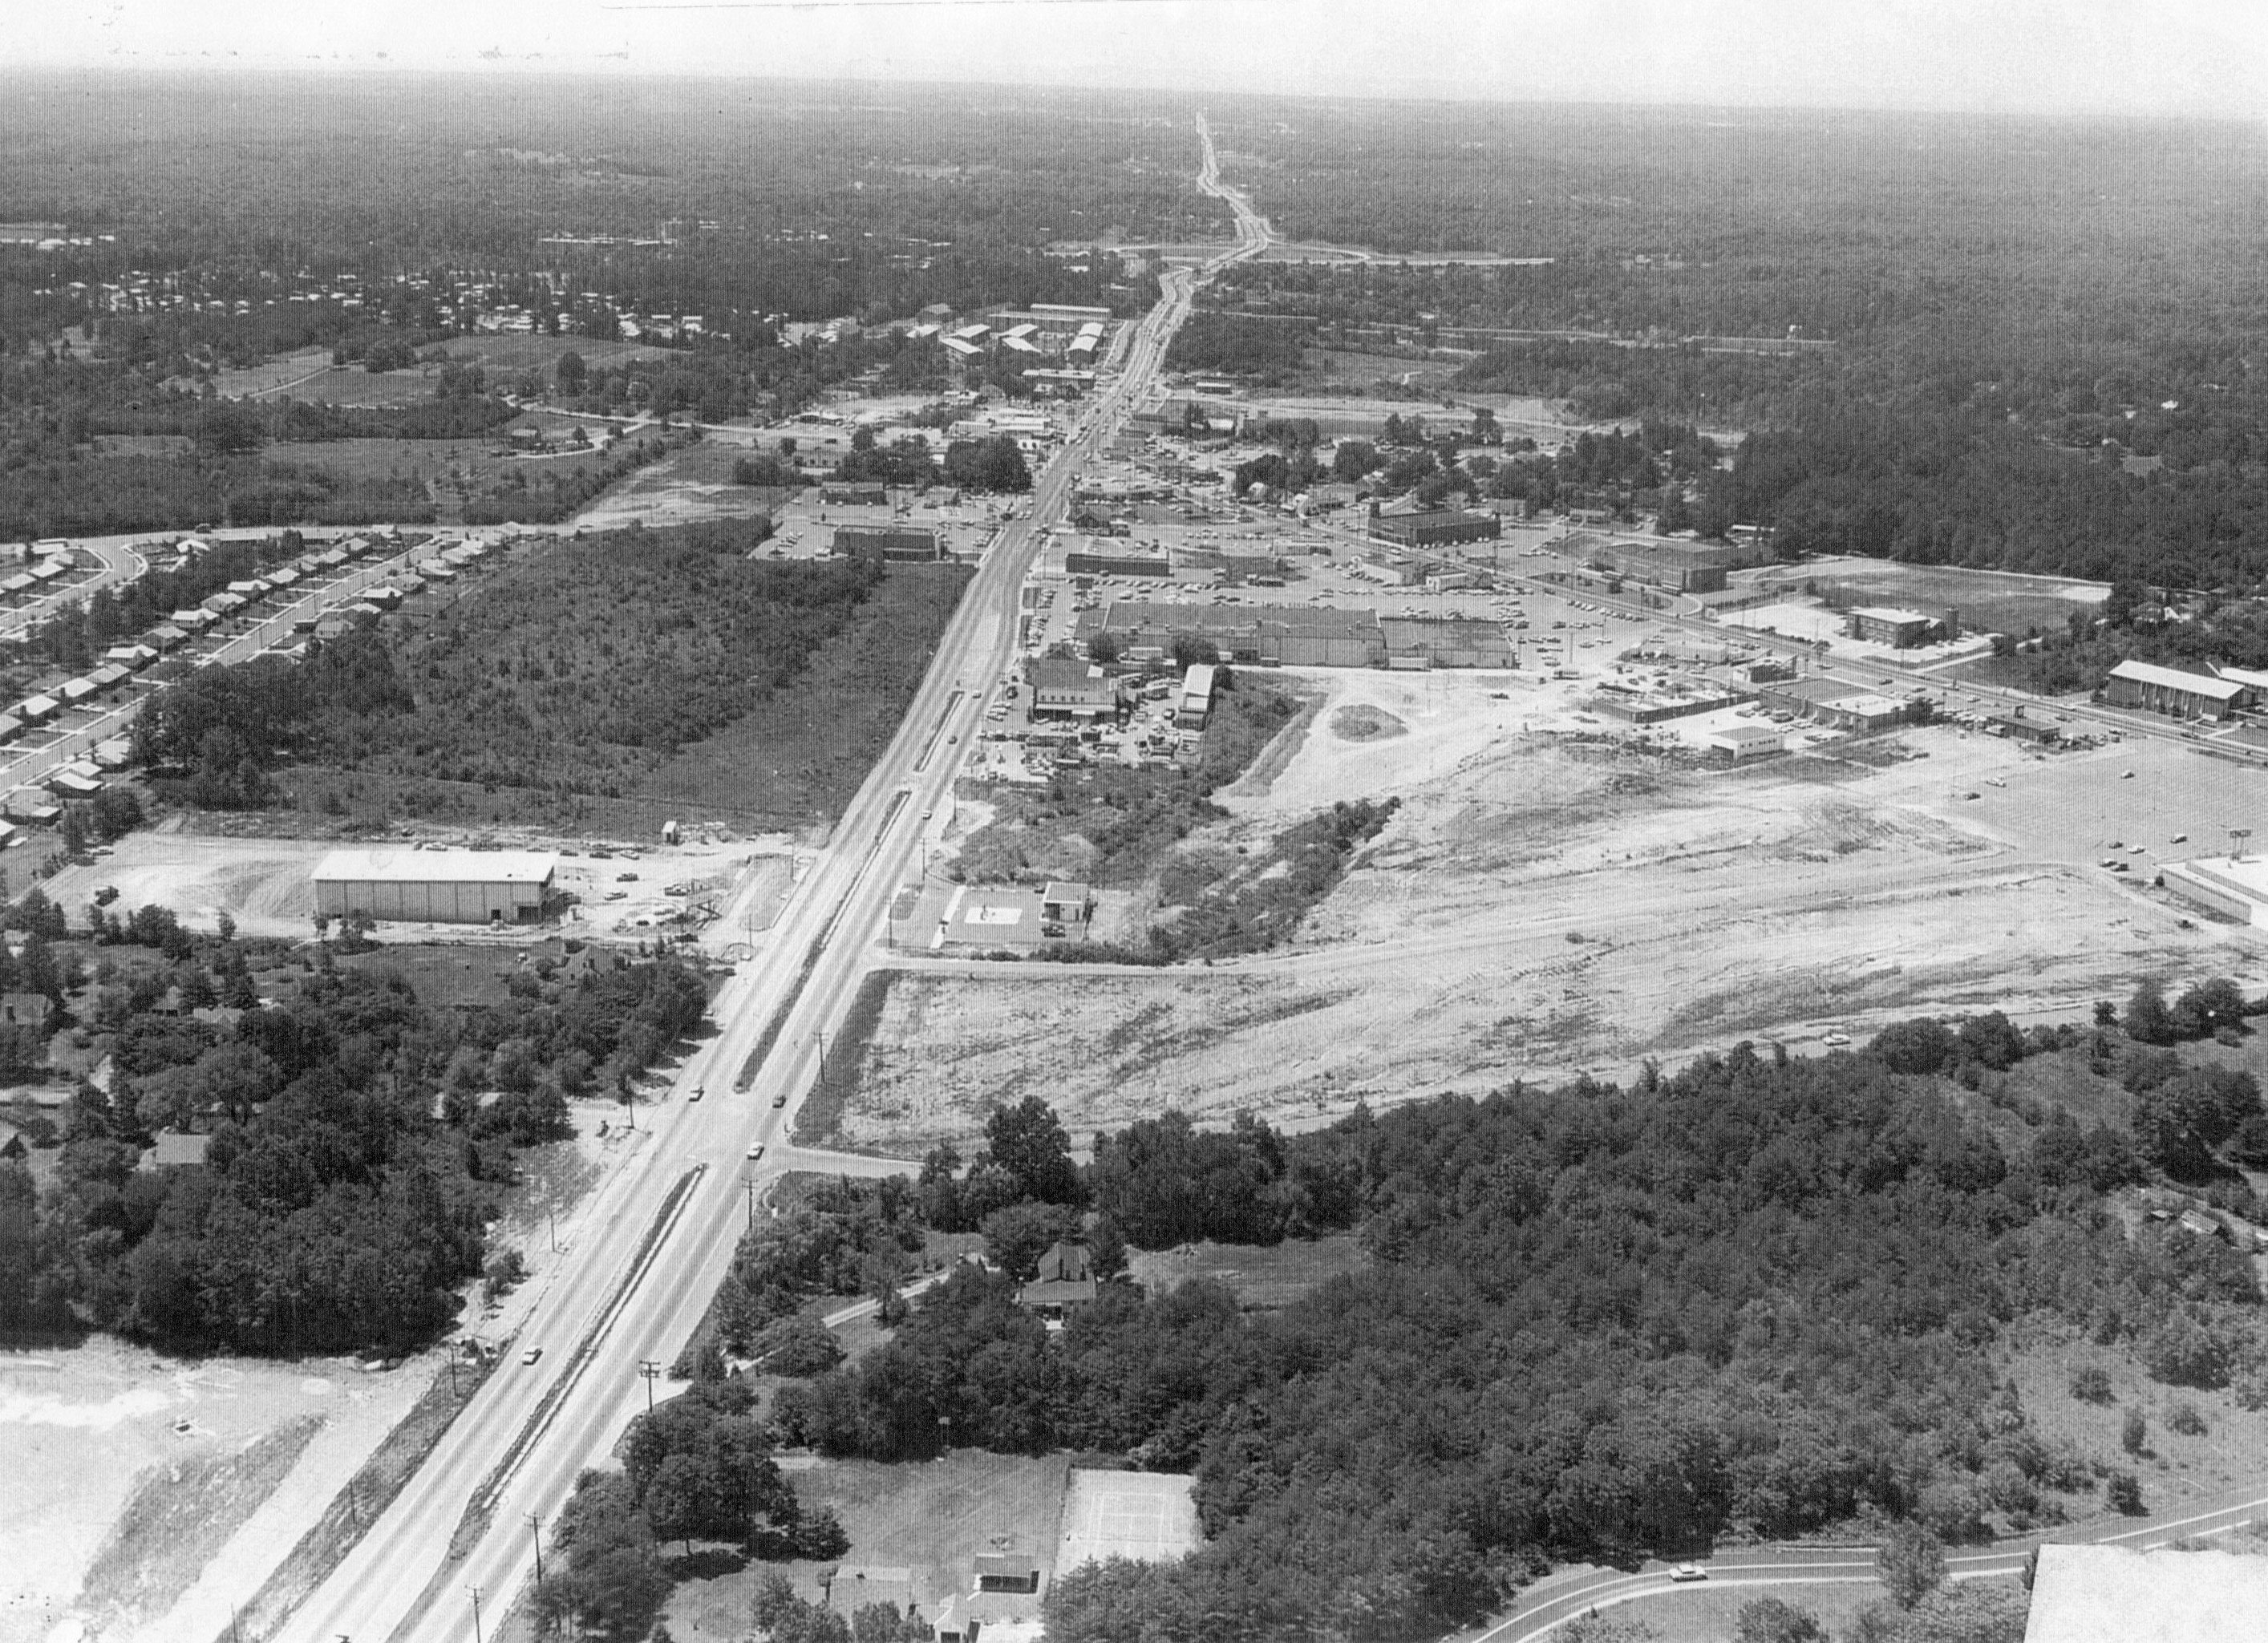 View of Little River Turnpike looking west from Evergreen Lane toward the Beltway.  Large undeveloped space to the right will become home to K-mart in 1972.  Photograph is courtesy of the photographic archive of the Annandale Chamber of Commerce. toward the Beltway.  Large undeveloped space to the right will become home to K-mart in 1972.